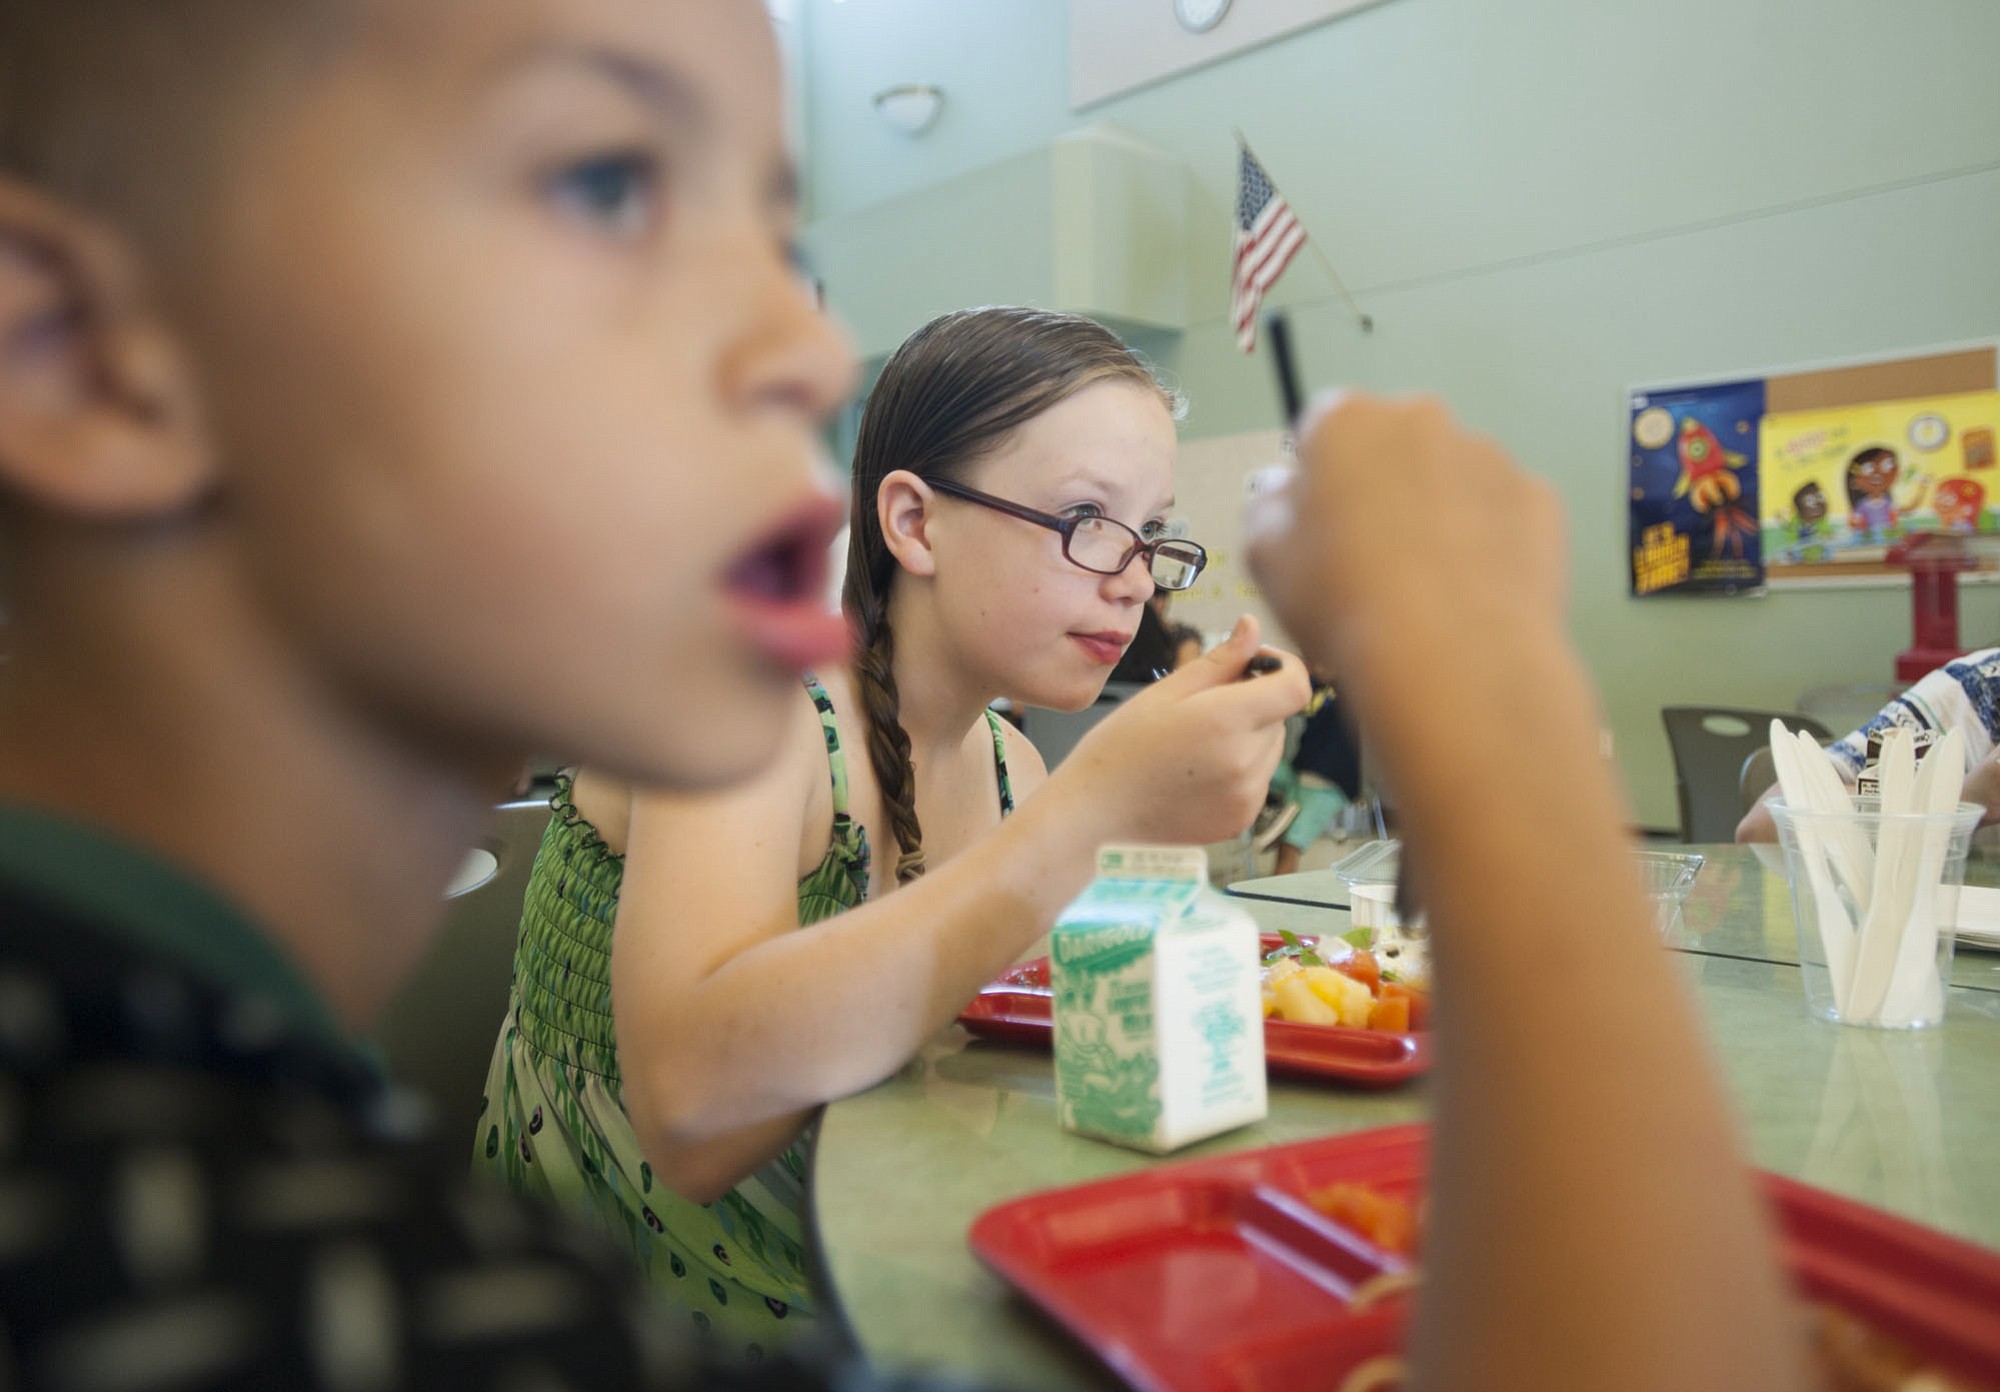 Siblings Chance 8, left, and Ashton Kalahan, 12, eat a free spaghetti lunch Wednesday at Fruit Valley Elementary School in Vancouver.